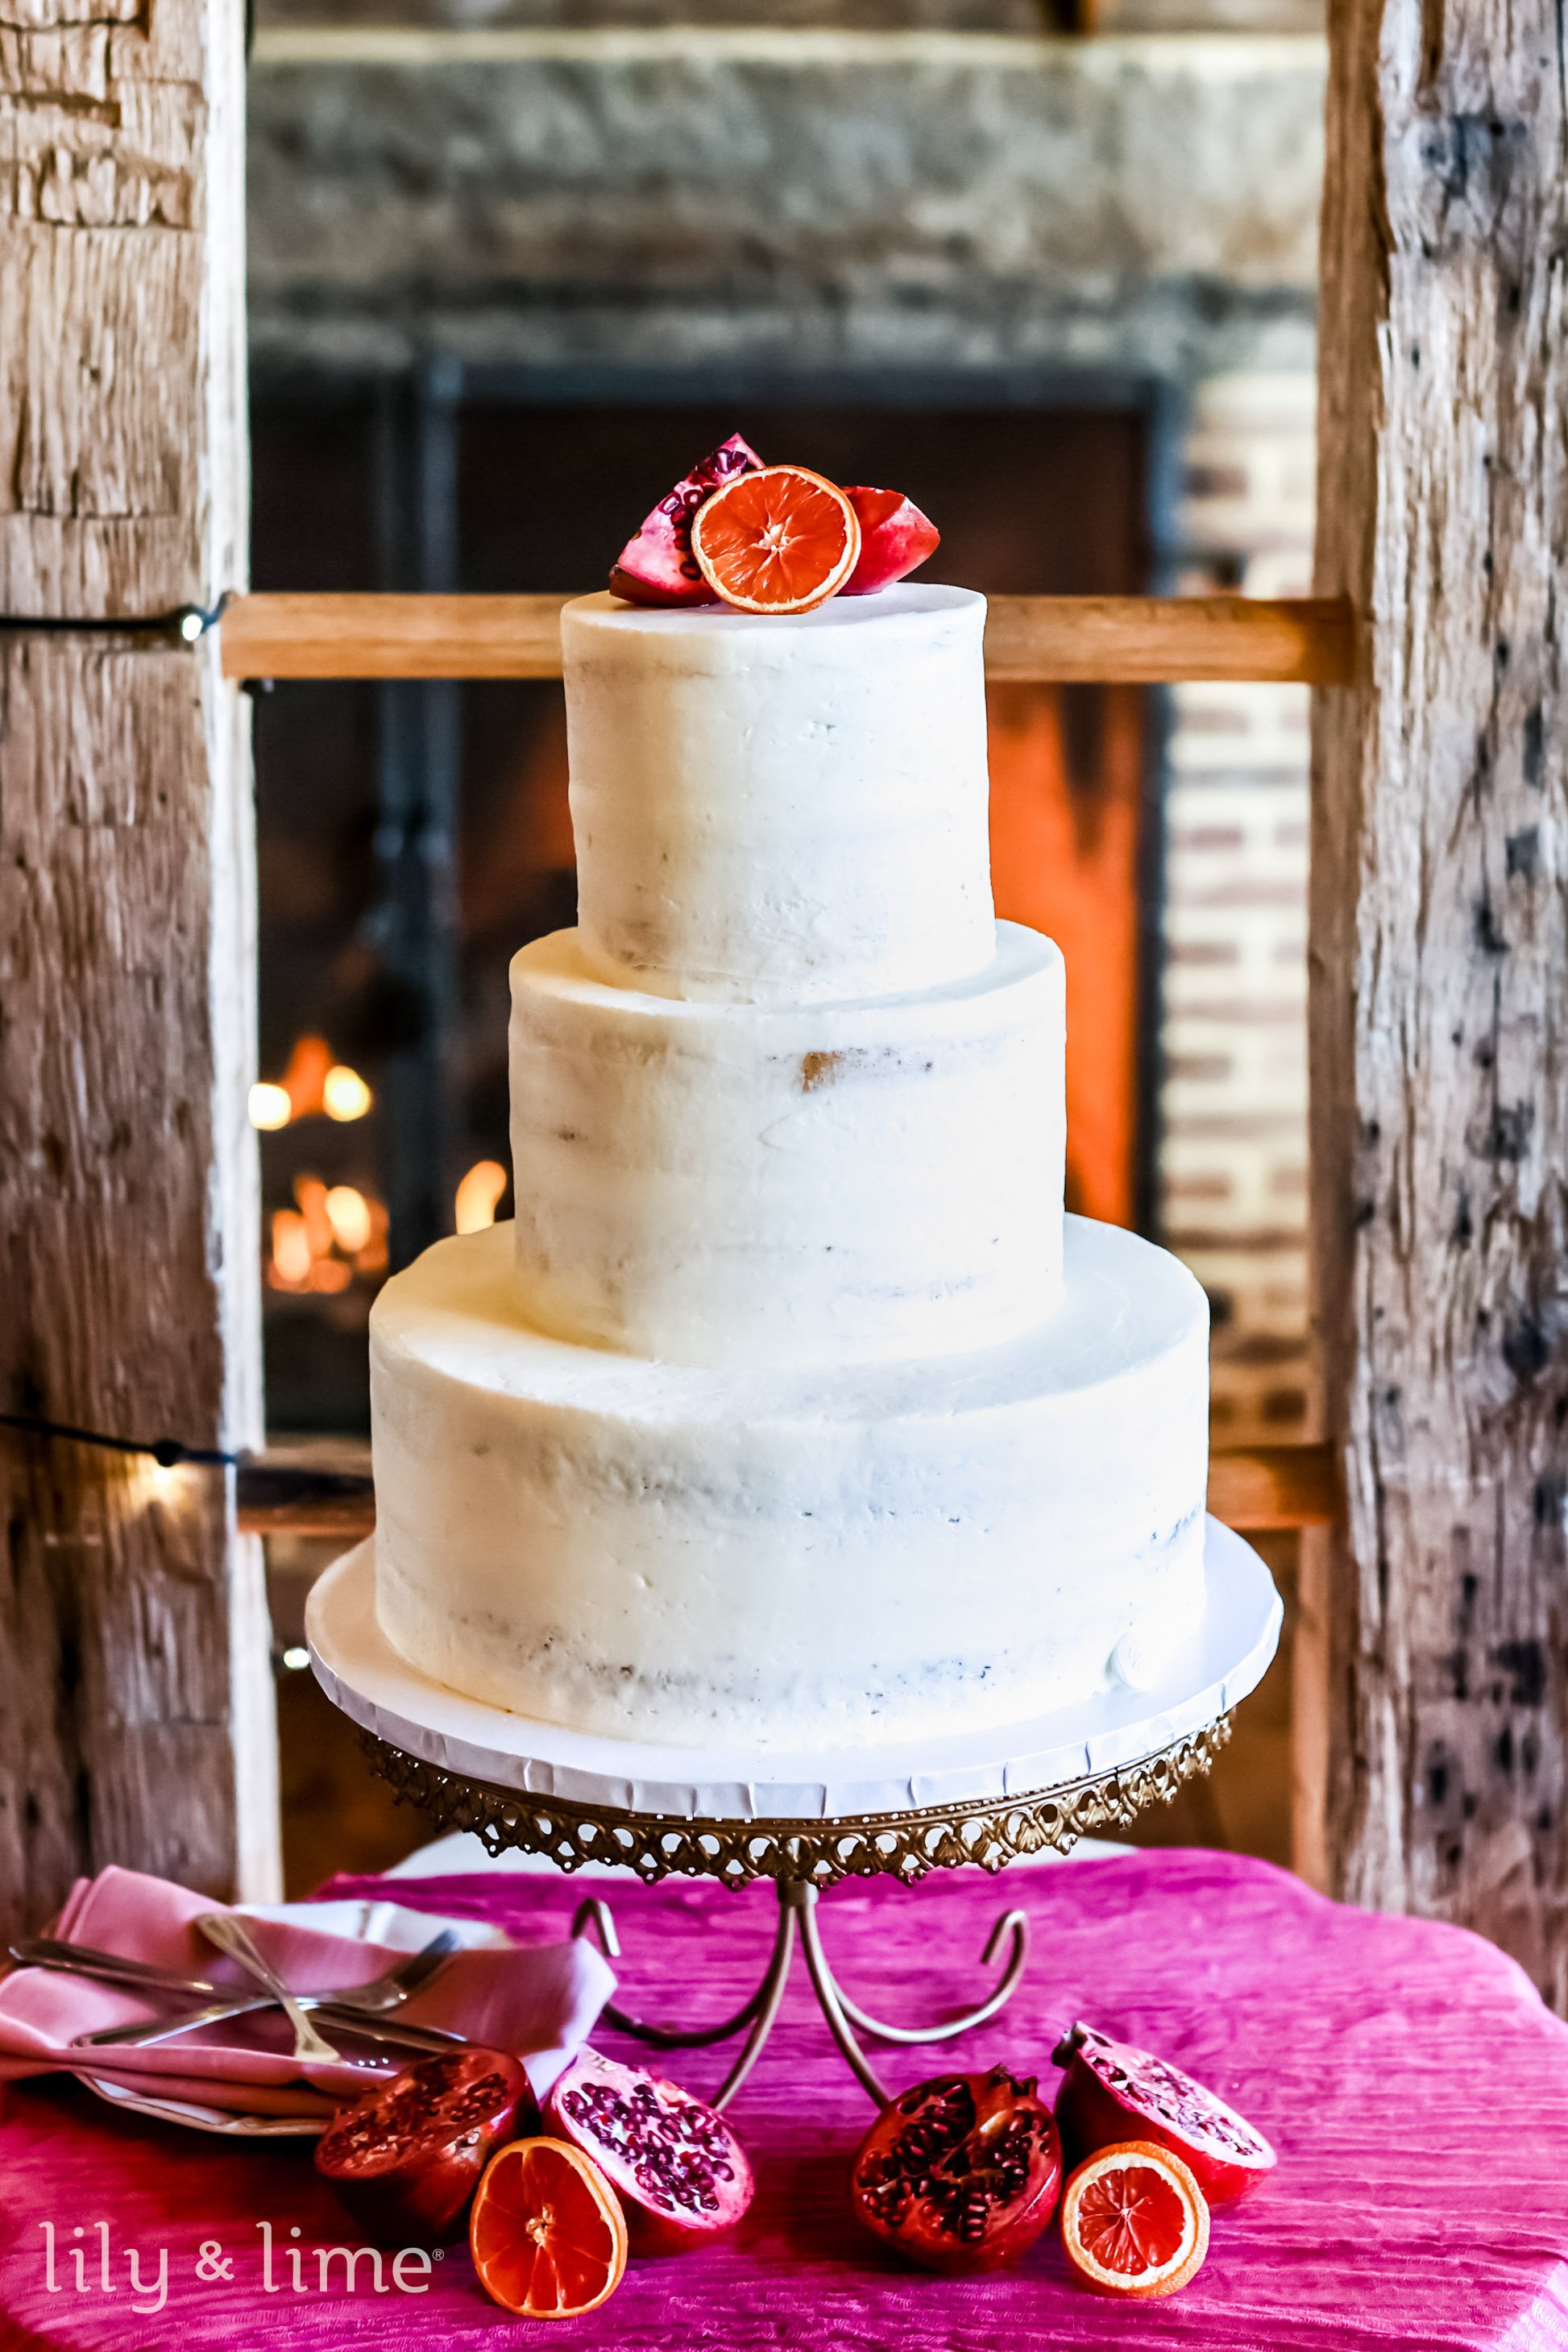 The Most Popular Summer Wedding Cake Flavors